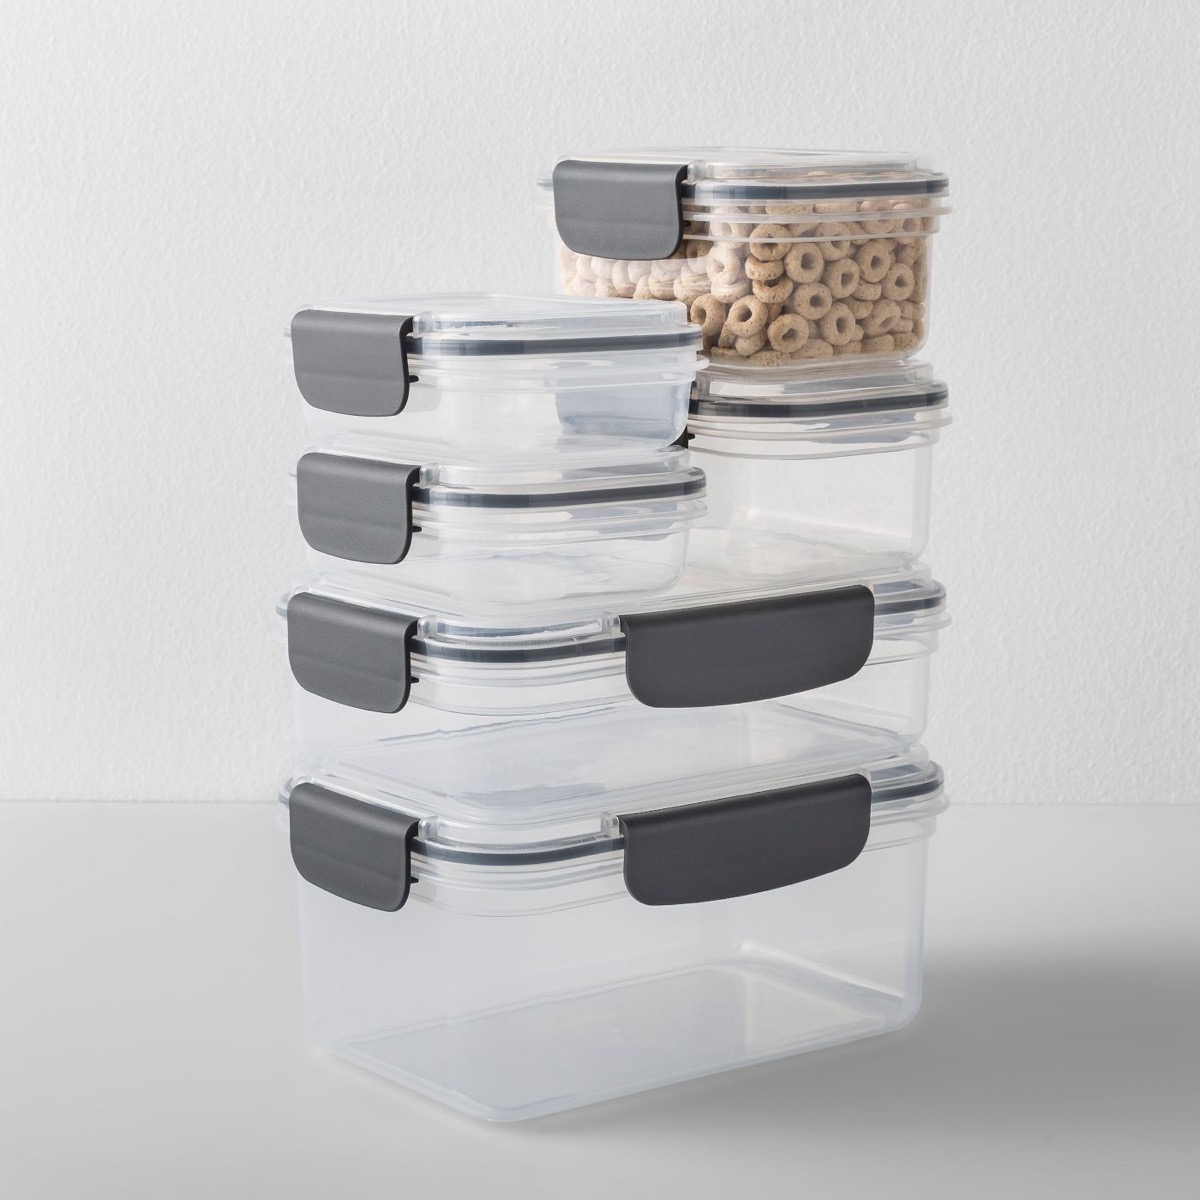 15 Meal Prep Containers You Can Buy for Under $25 — Eat This Not That